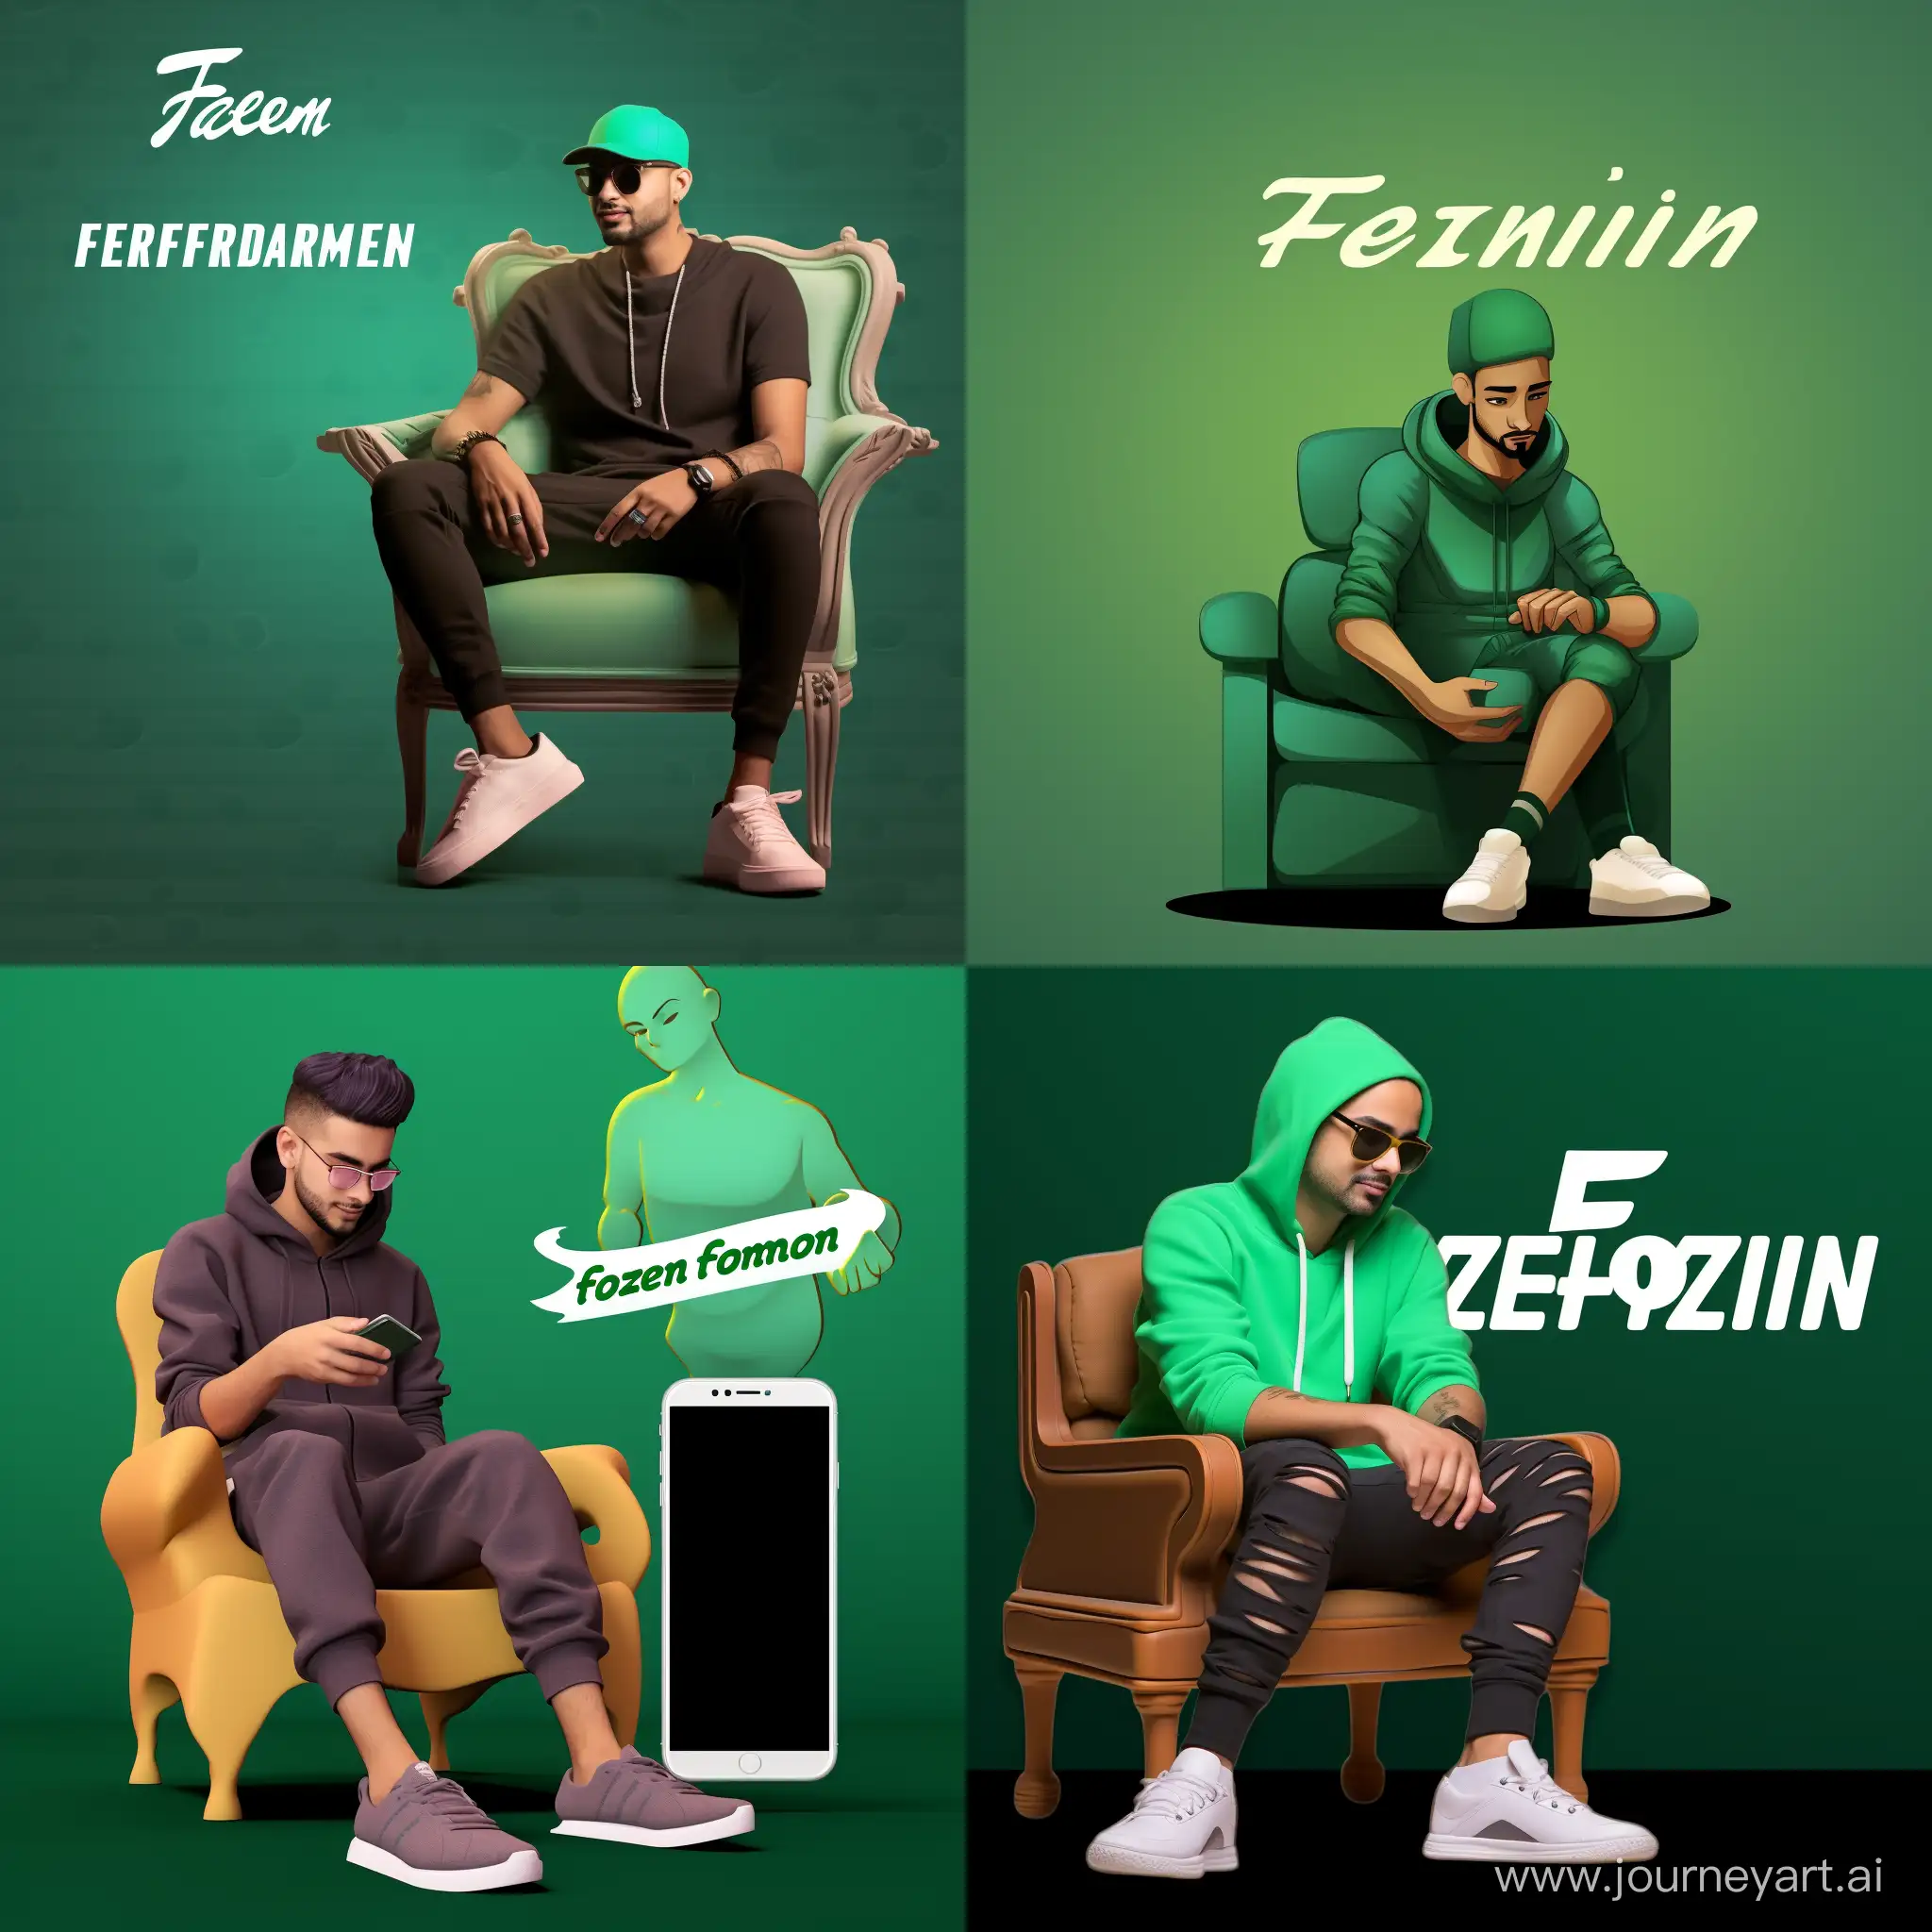 Design a 3d image in which a person is sitting on a whstapp logo wearing casual dress and Jordans. There is a name on the bottom of logo "ZeeForZain" and in the side background there is a whatsapp profile page displaying name "ZeeForZain" About "Finding the Fantasies" and in dp part, similare person is shown.